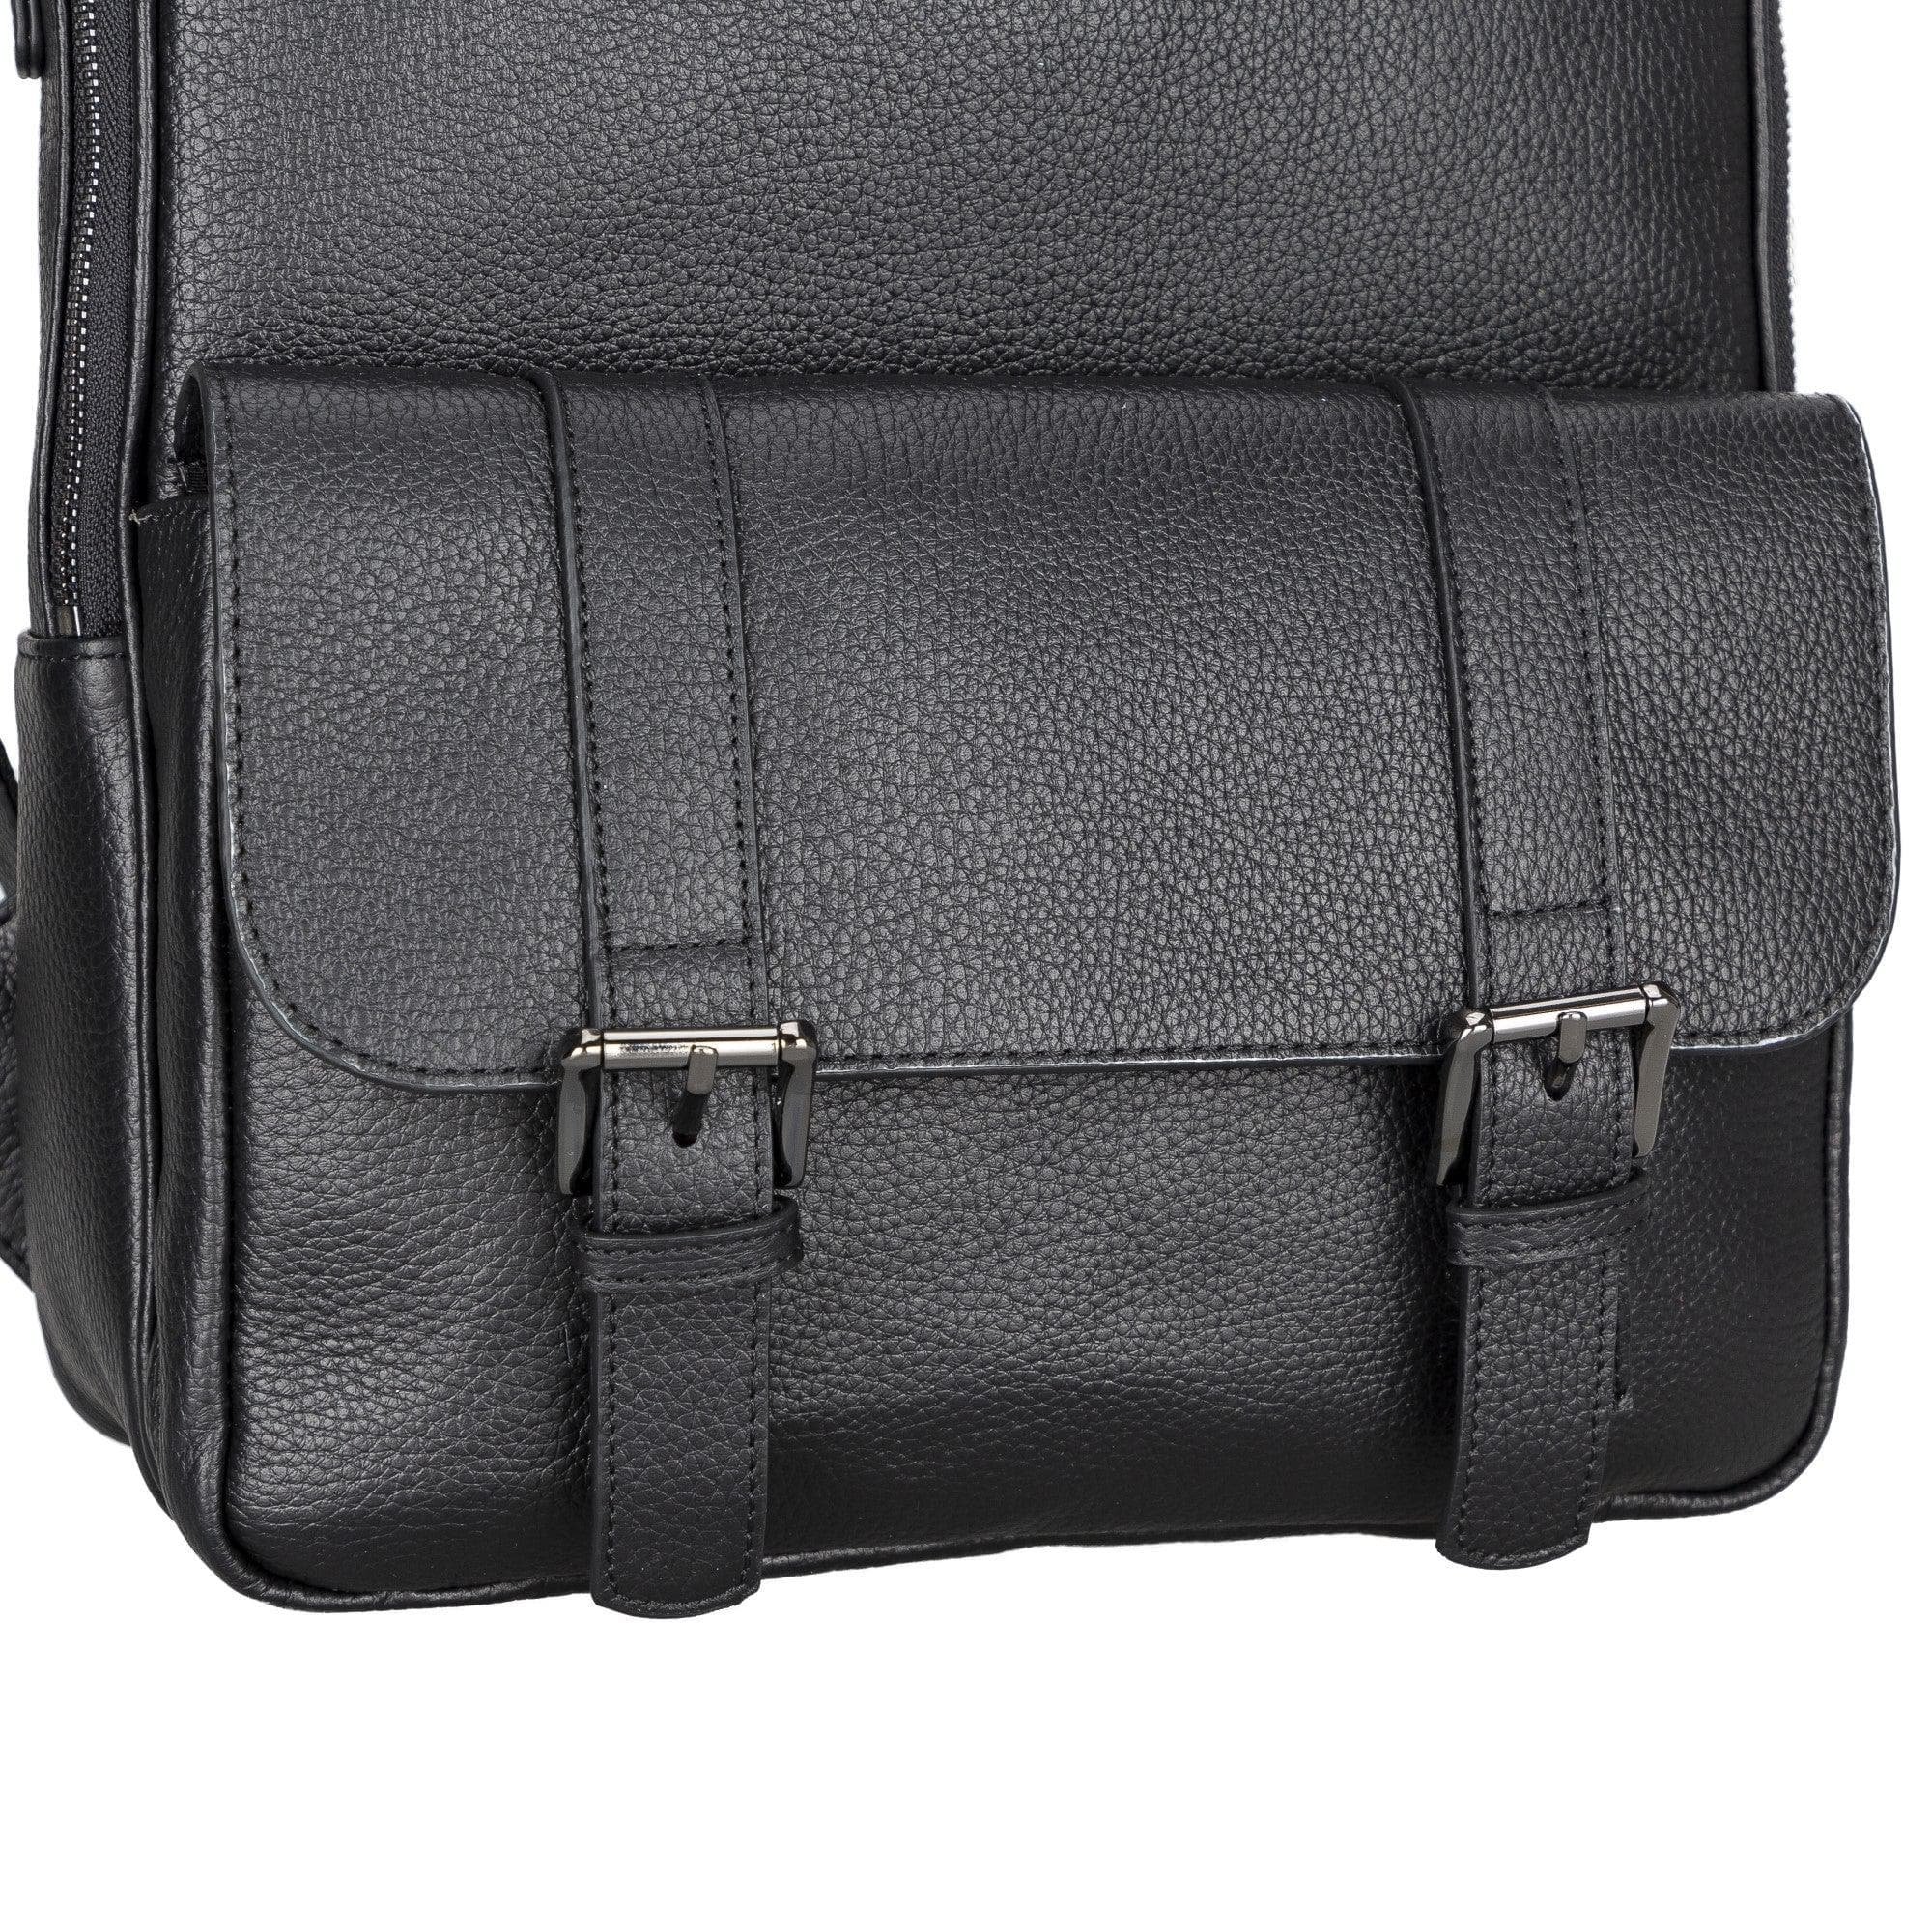 Molde Unisex Genuine Leather Backpack for Daily Life or Laptop / MacBook Black Bouletta